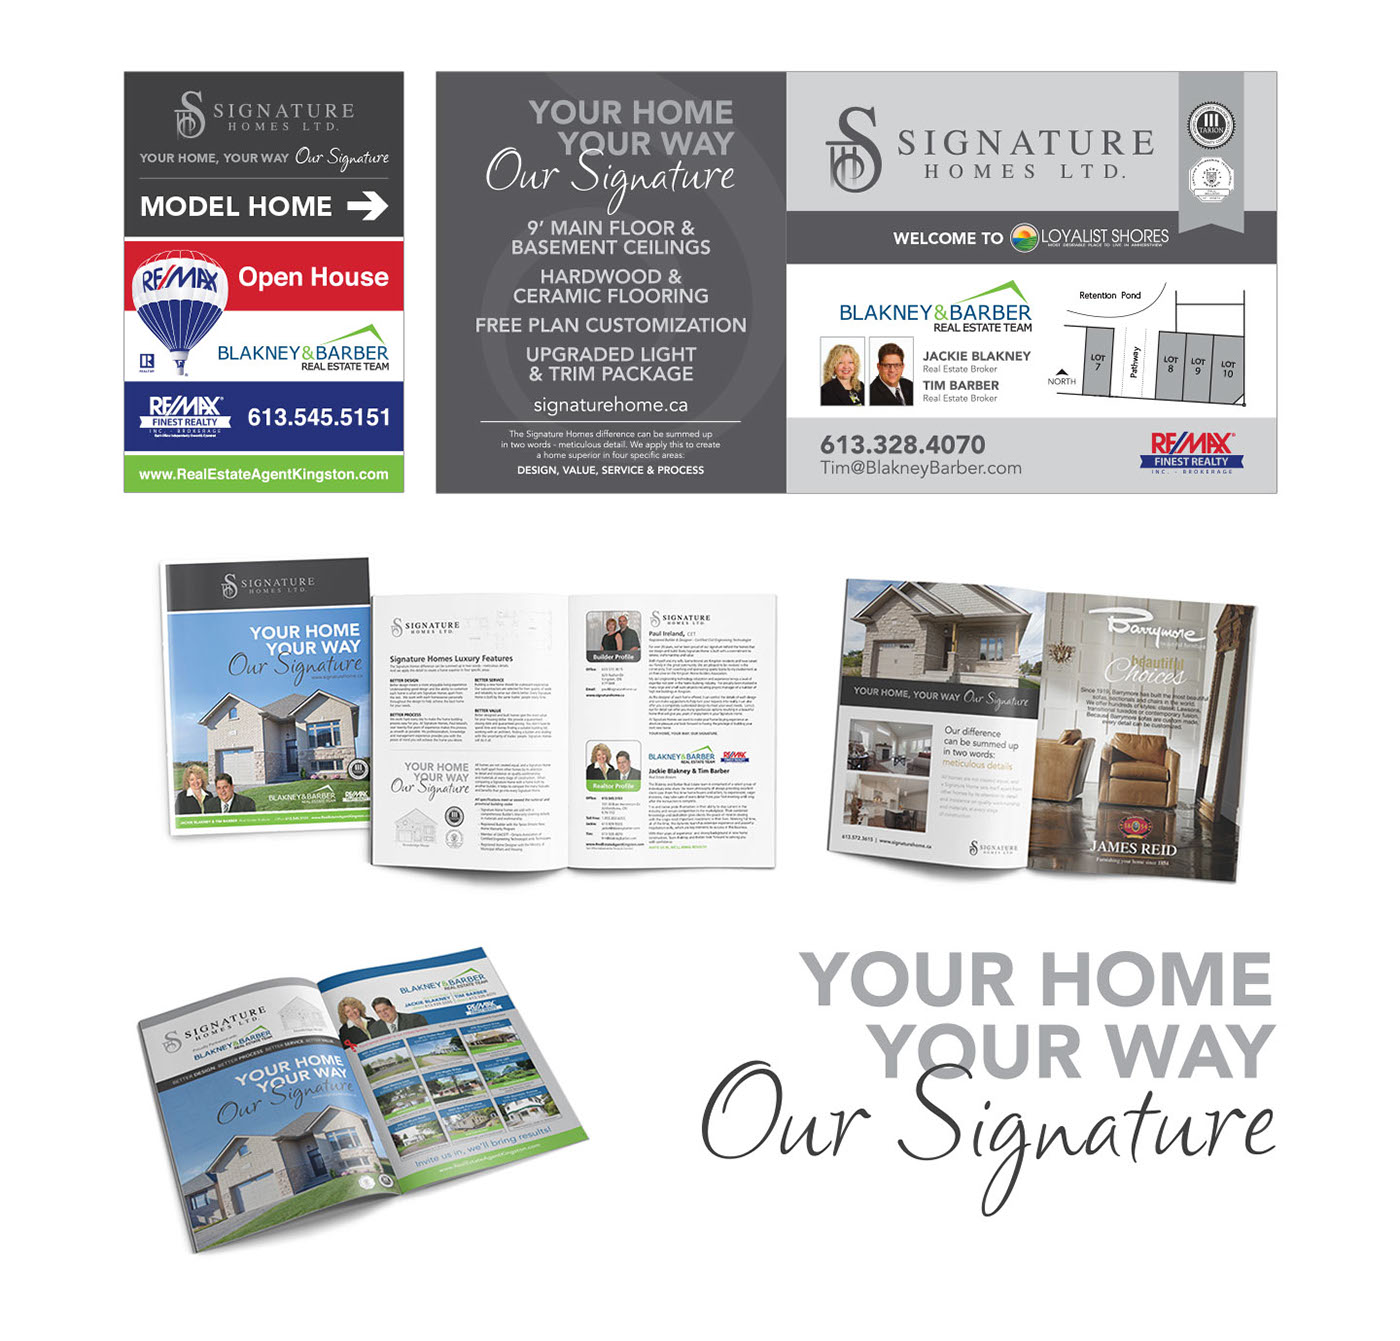 Adobe Portfolio real estate Direct mail kingston realtor home sell house print ads signs newspaper